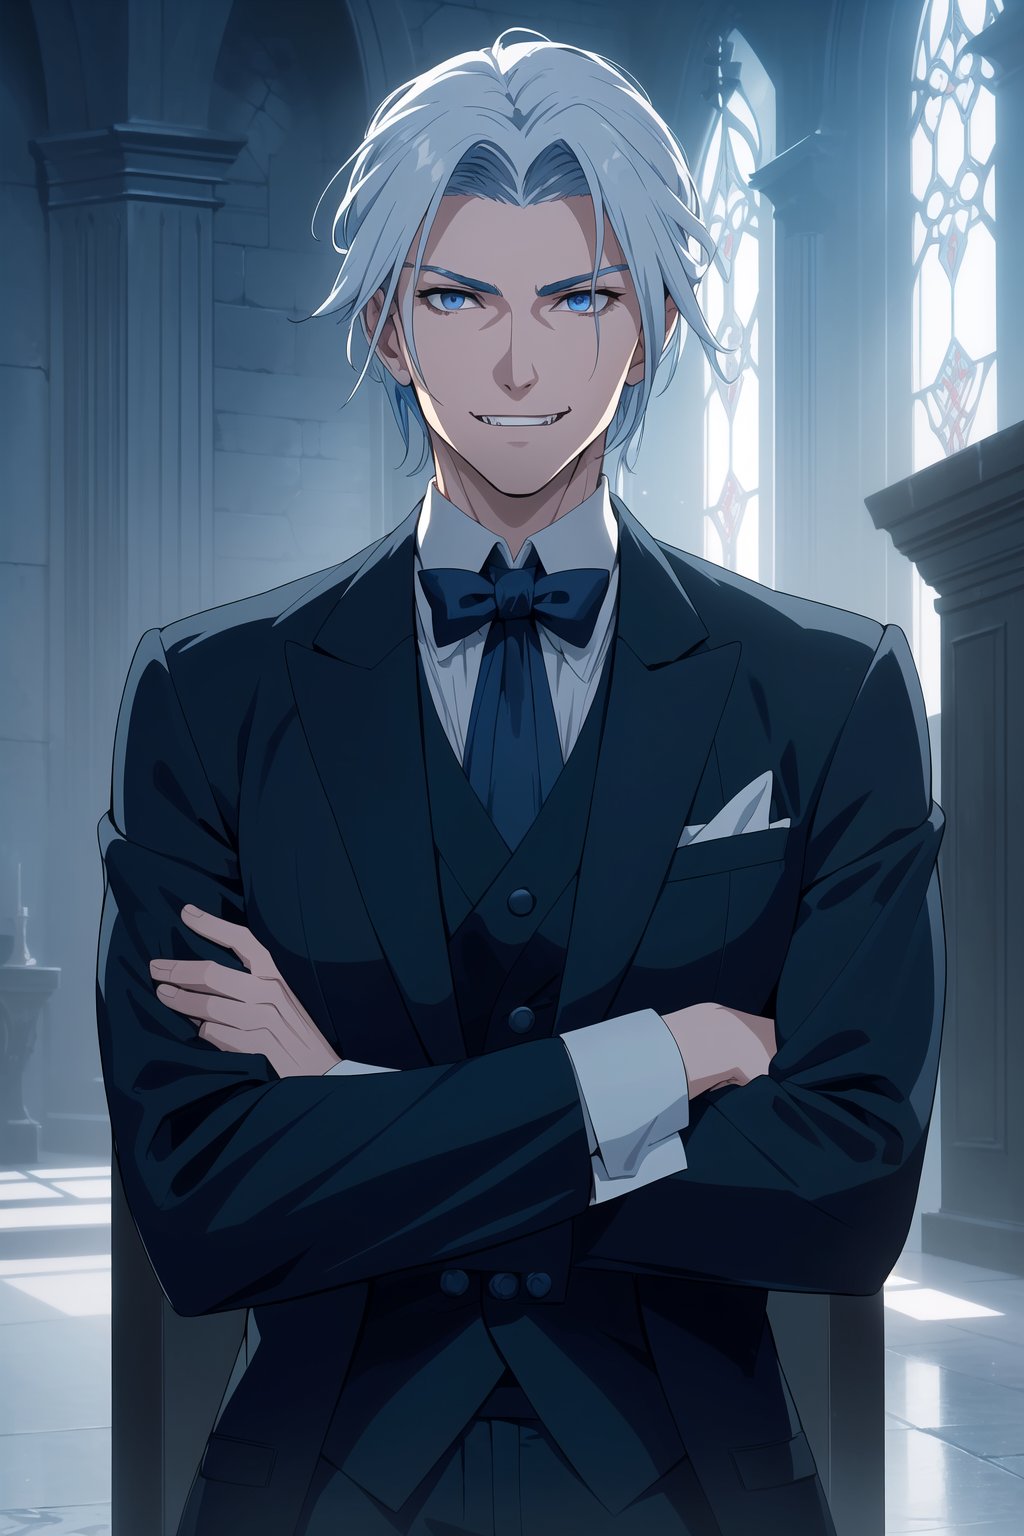 (Masterpiece, Best Quality), (A Stern 30-Year-Old Male Vampire Warrior), (Icy Blue Touseled Hair:1.4), (Sharp Silver Eyes), (Fair Skin), (Thin Smile with Hidden Fangs:1.4), (Wearing Navy Blue Formal Suit:1.4), (Castle Hall at Night:1.4), (Crossed Arms Pose:1.4), Centered, (Half Body Shot:1.6), (From Front Shot:1.4), Insane Details, Intricate Face Detail, Intricate Hand Details, Cinematic Shot and Lighting, Realistic and Vibrant Colors, Sharp Focus, Ultra Detailed, Realistic Images, Depth of Field, Incredibly Realistic Environment and Scene, Master Composition and Cinematography,castlevania style